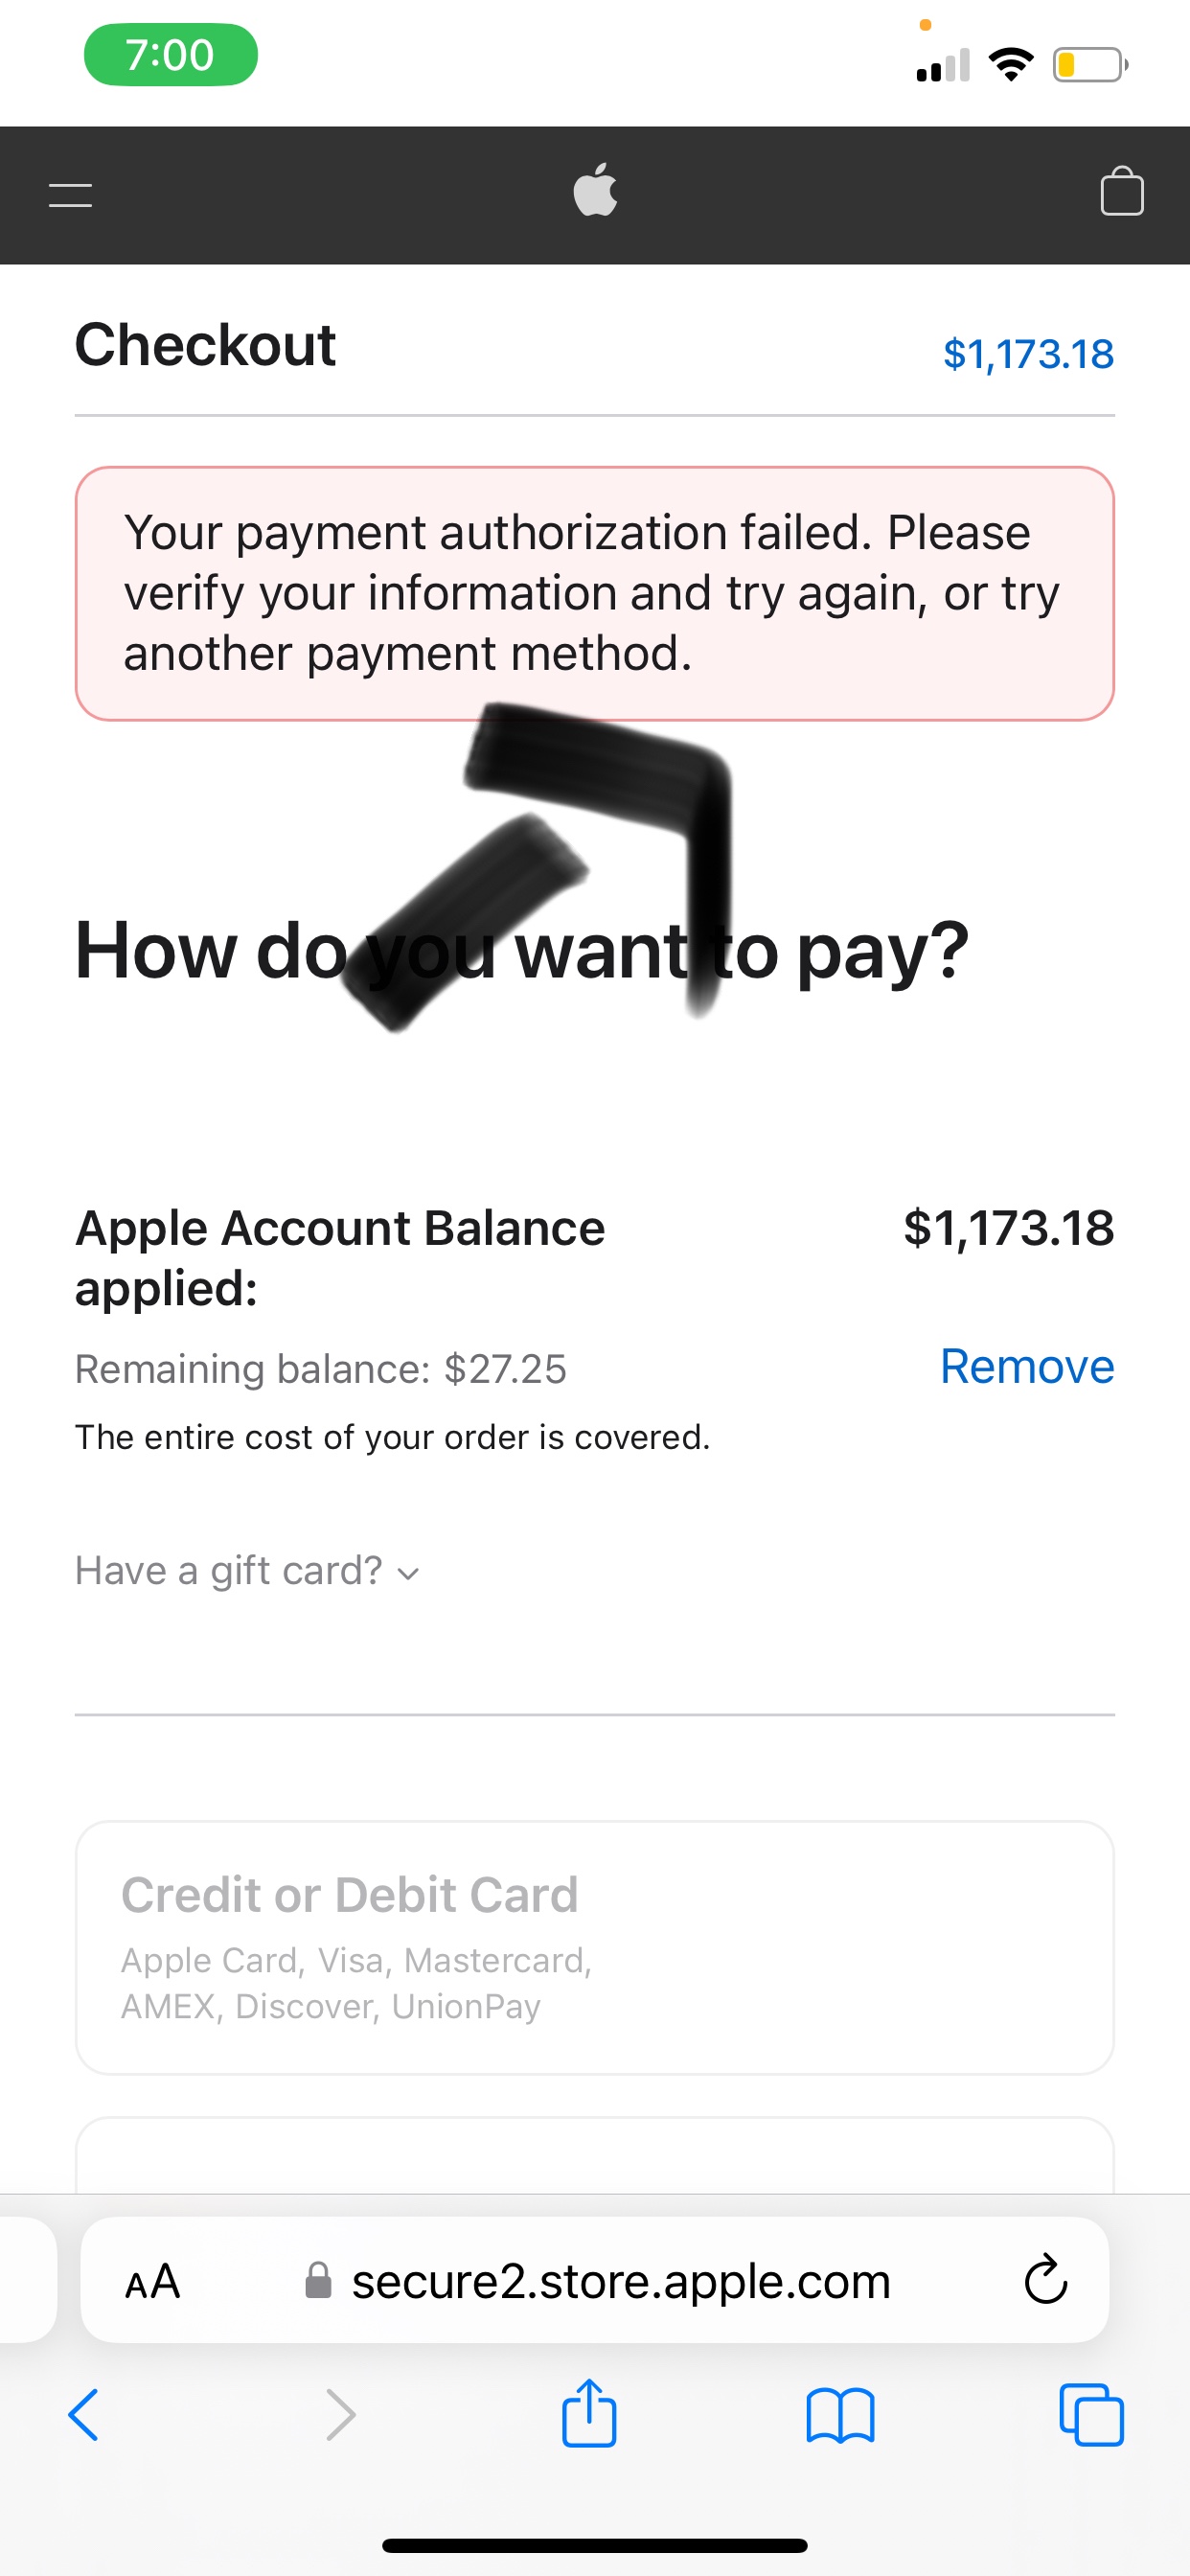 Redeem Apple Gift Card Confusion - Apple Community